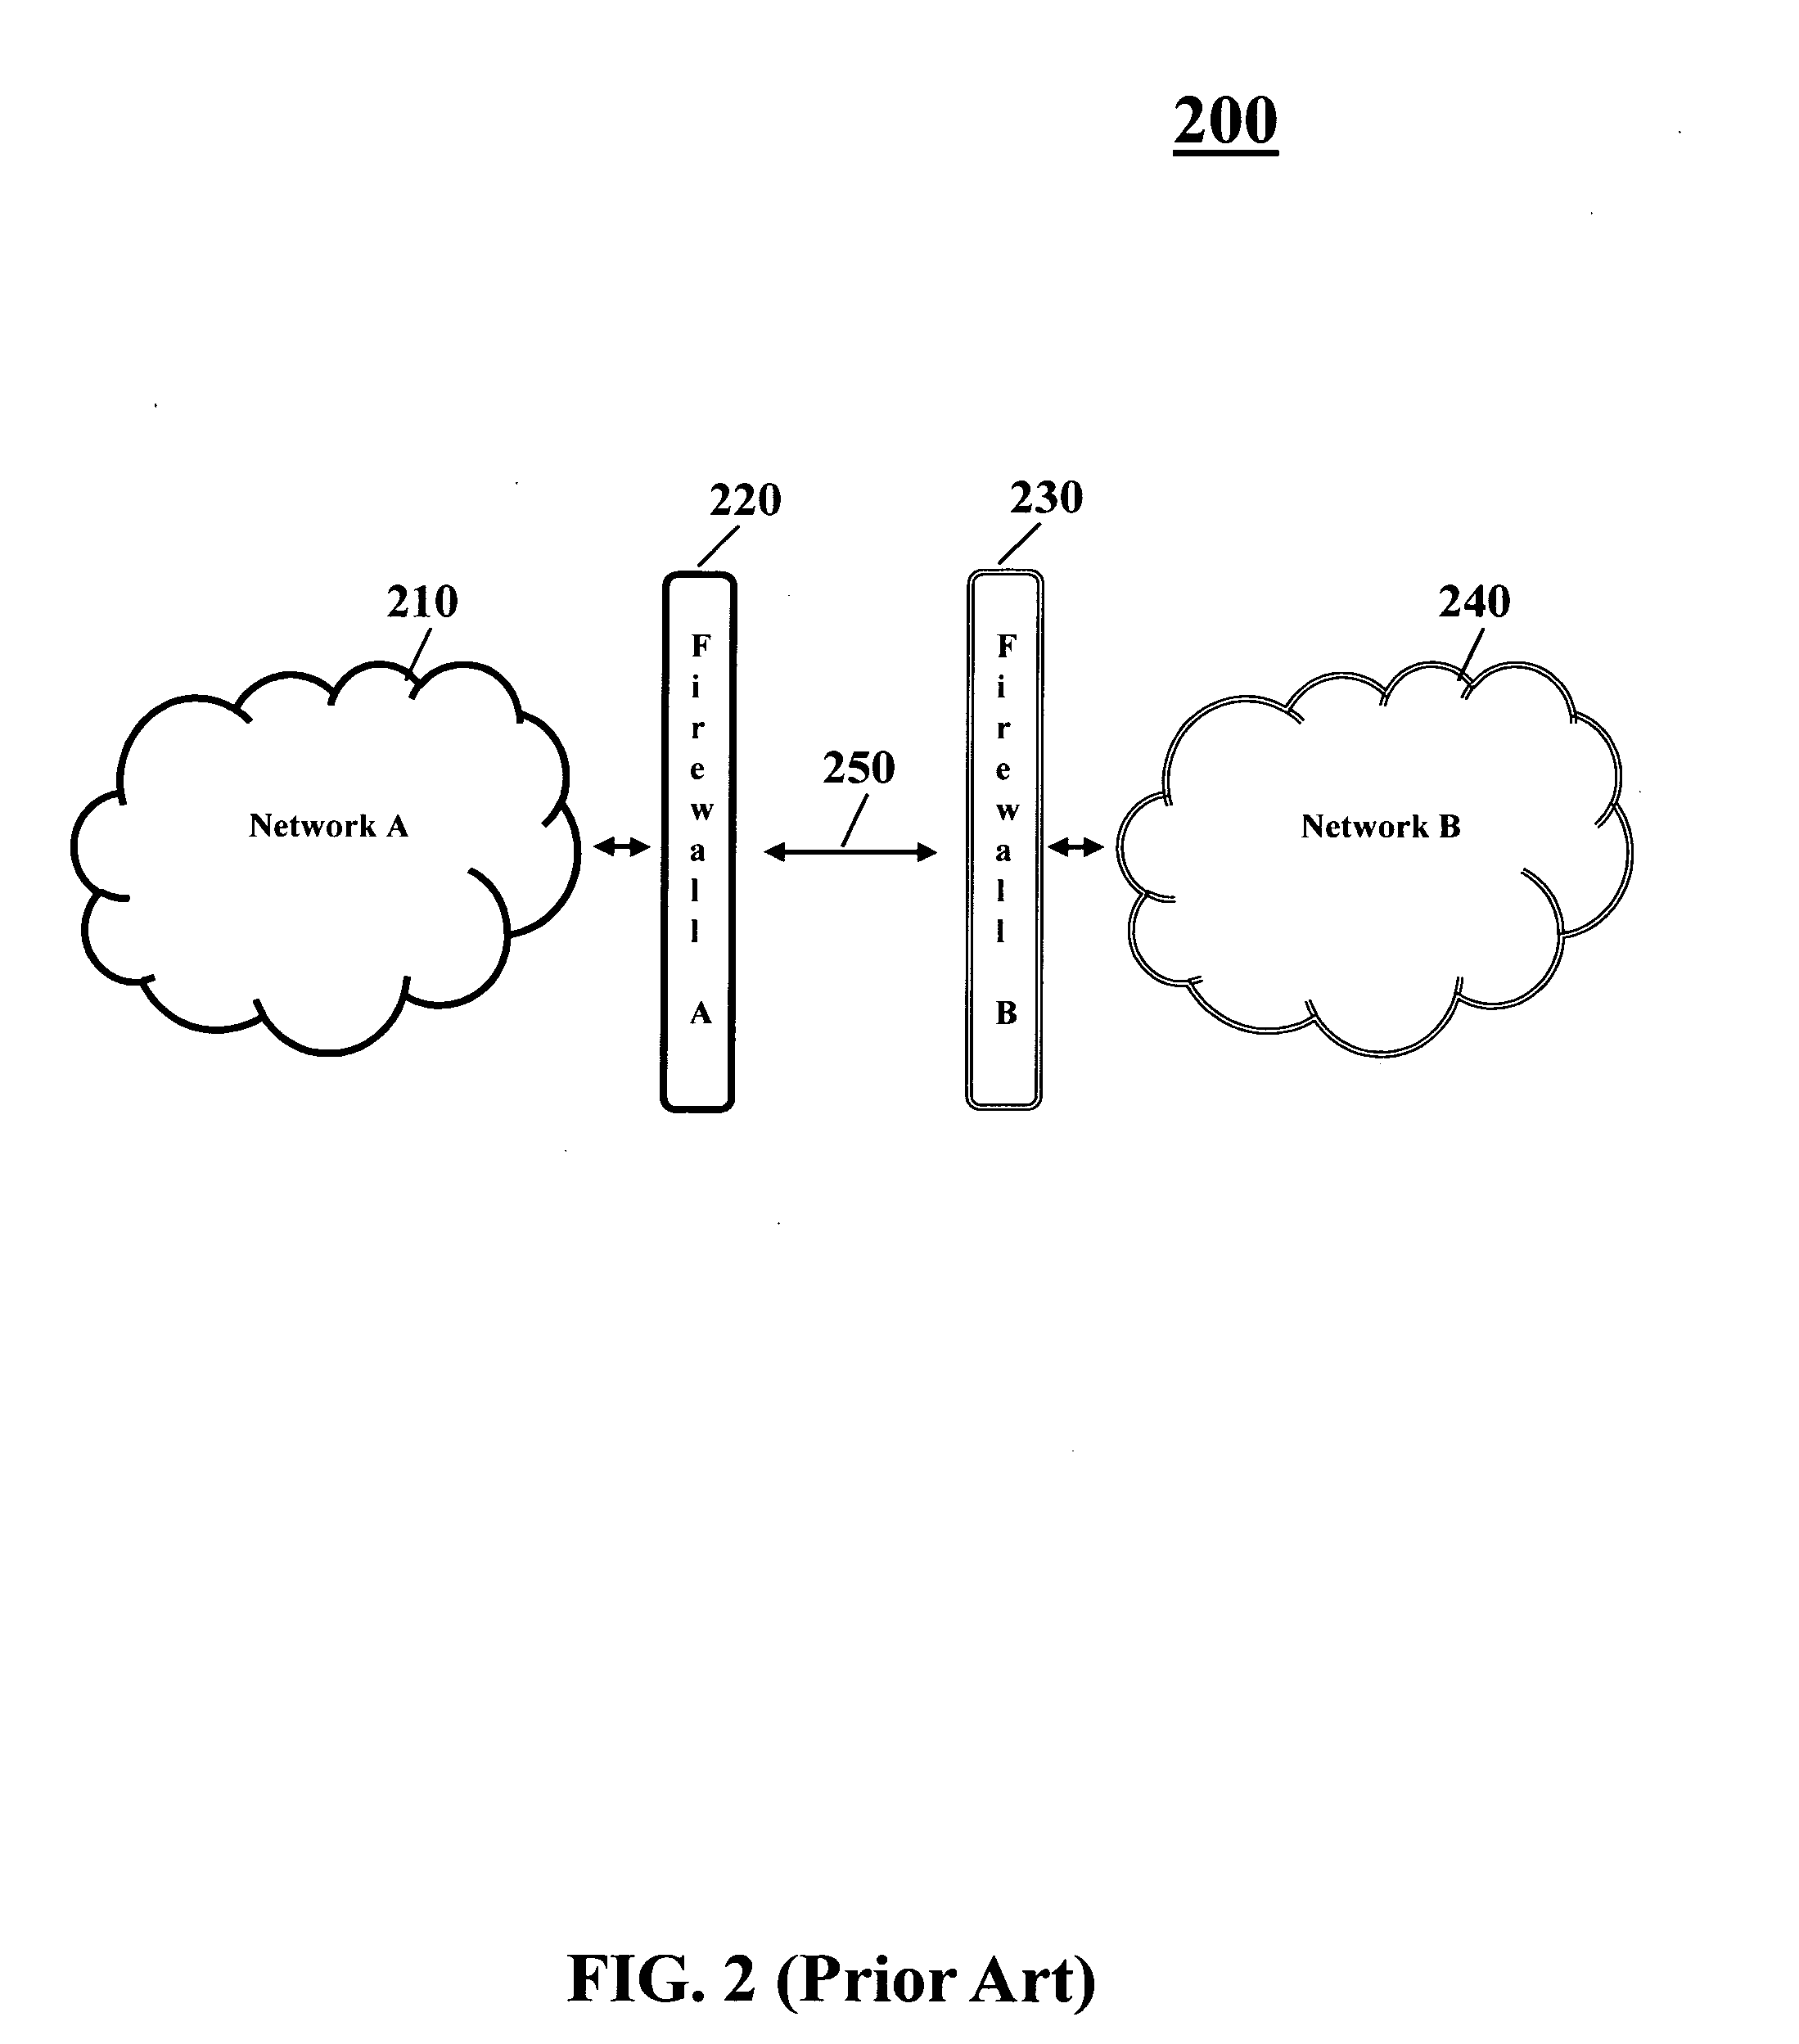 Independent role based authorization in boundary interface elements